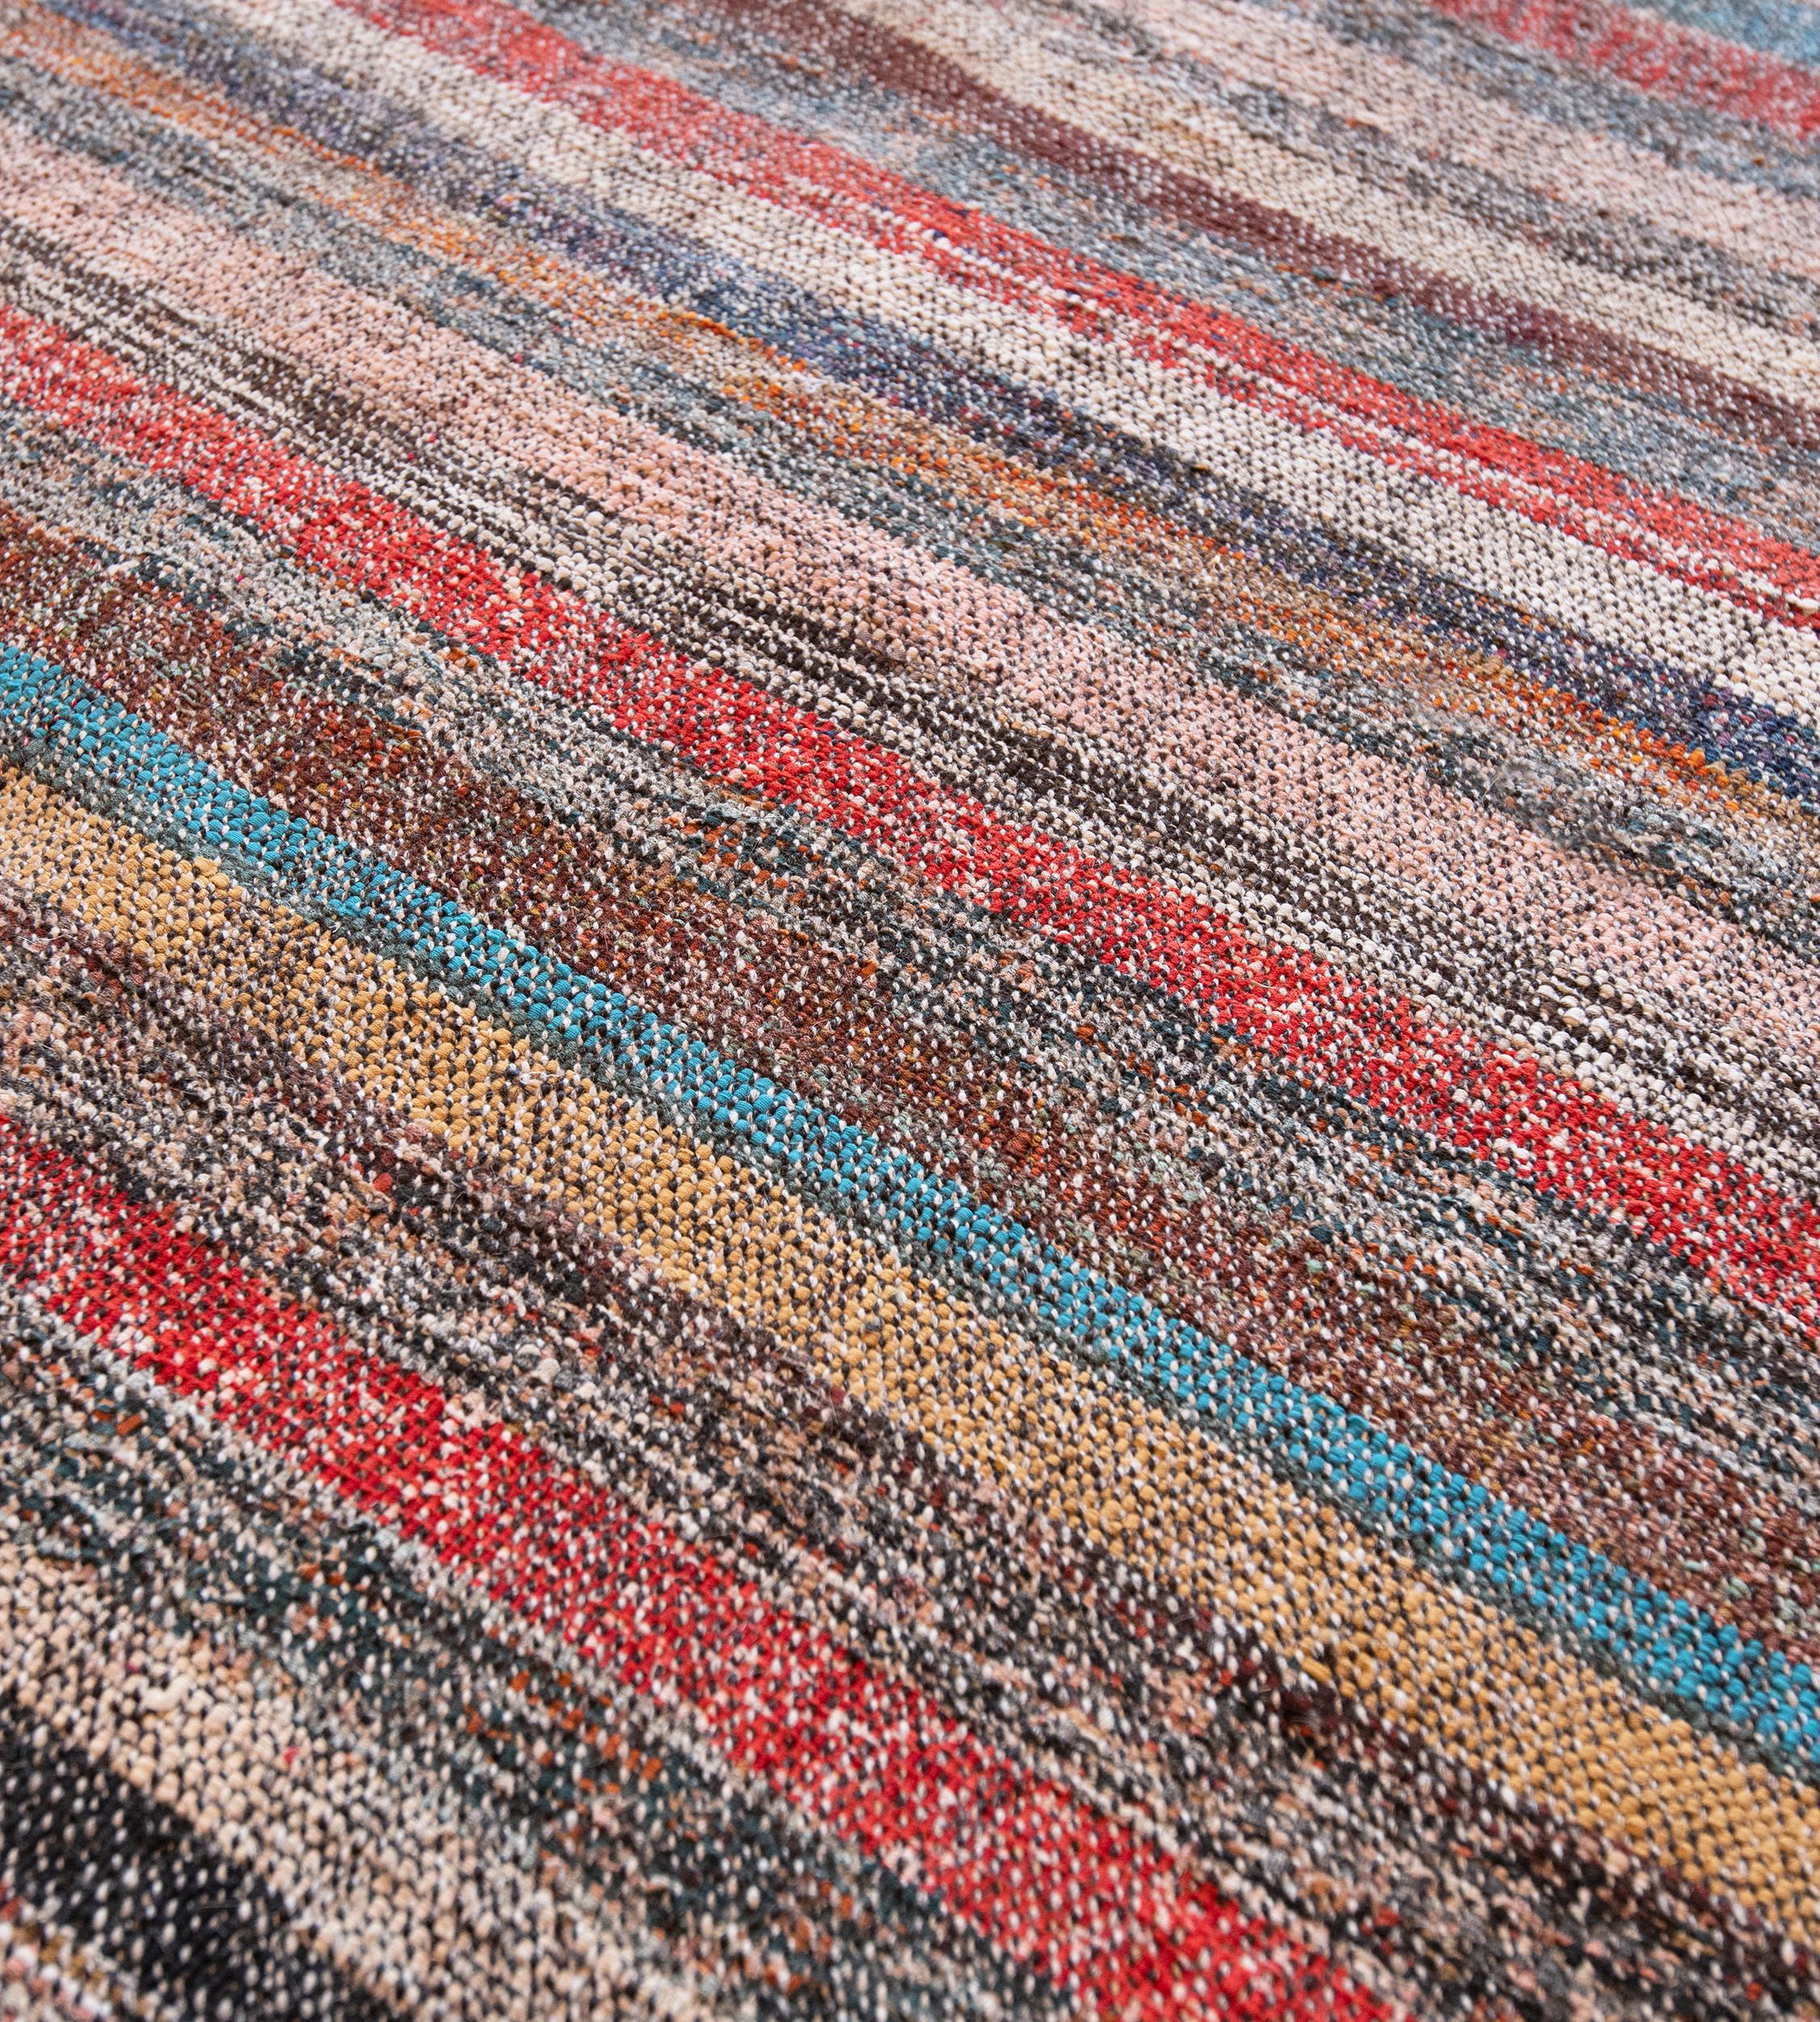 This handwoven flatweave Turkish carpet has a field of two panels joined together, with horizontal rows of polychrome stripes.